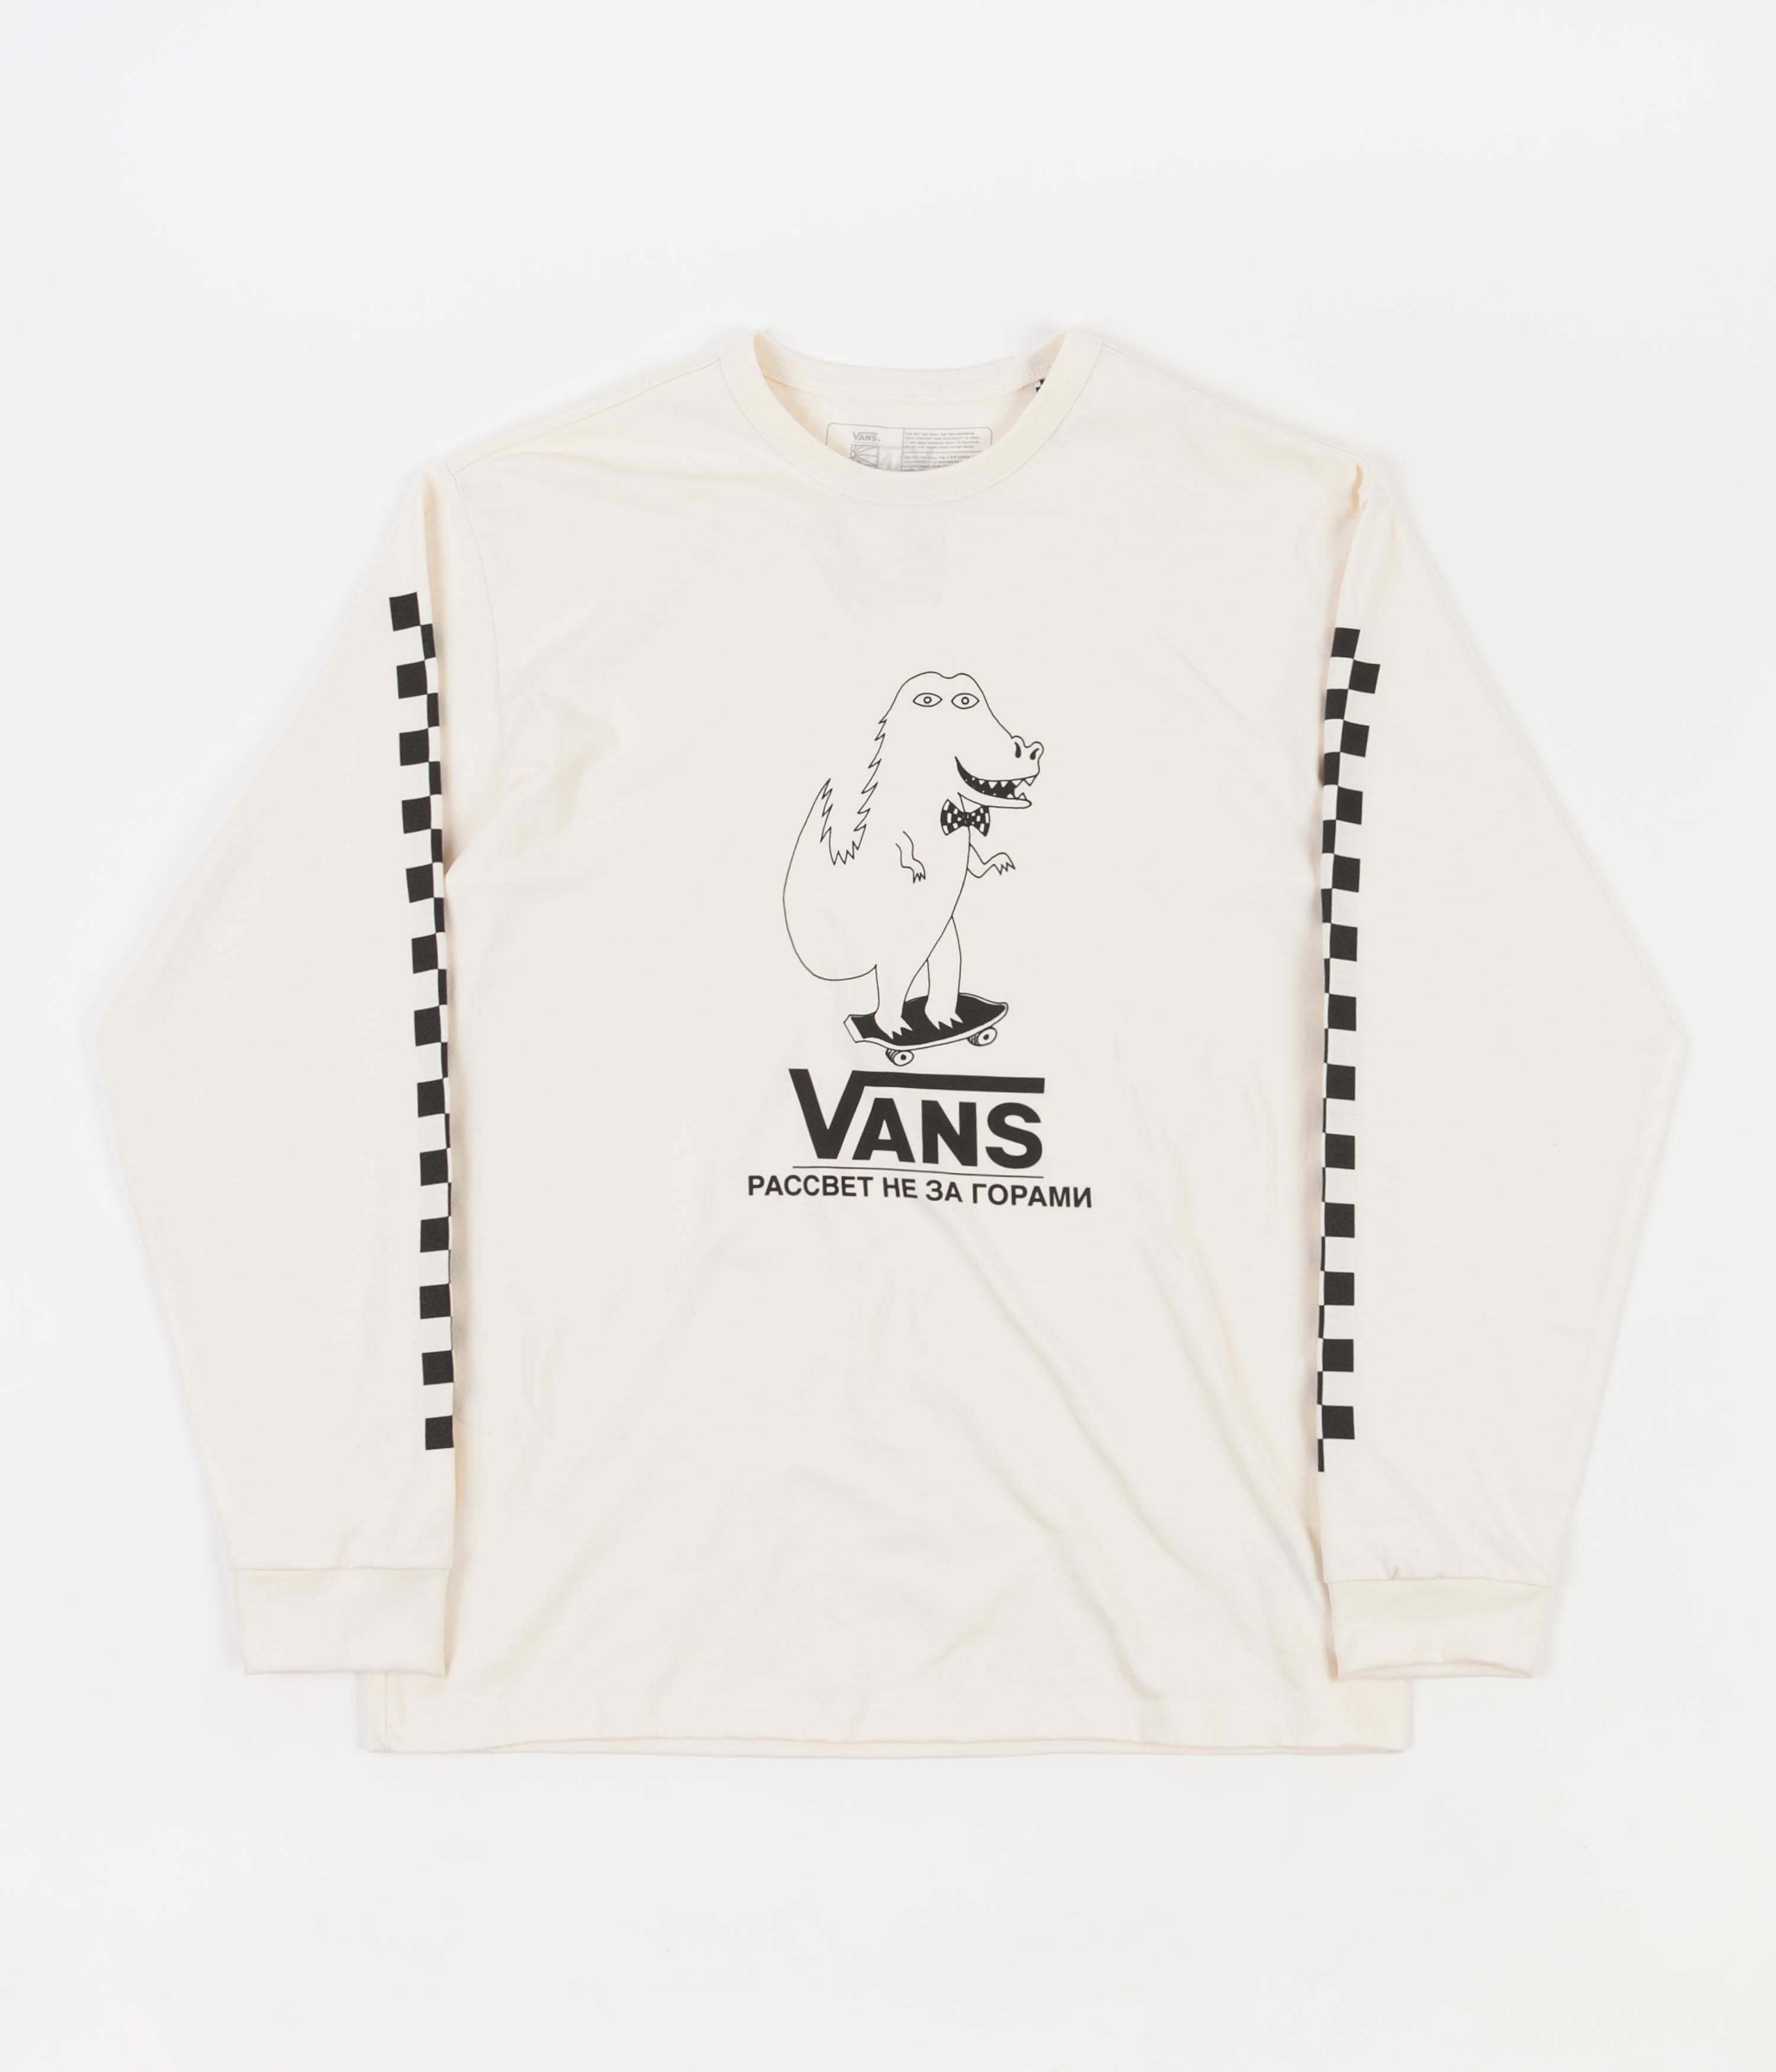 vans off the wall long sleeve